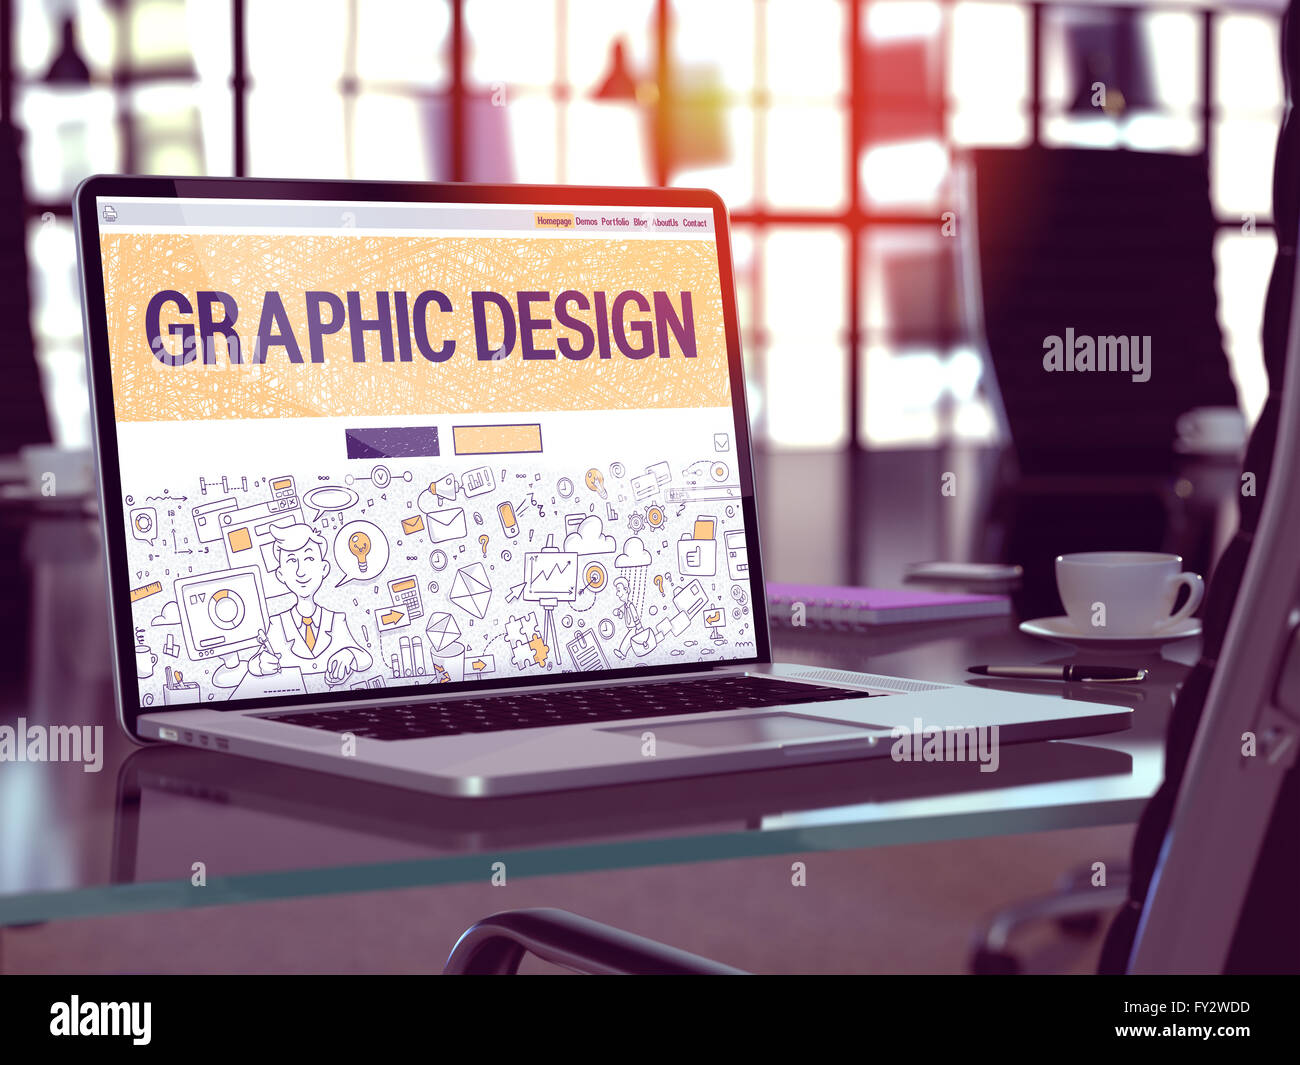 Laptop Screen with Graphic Design Concept. Stock Photo